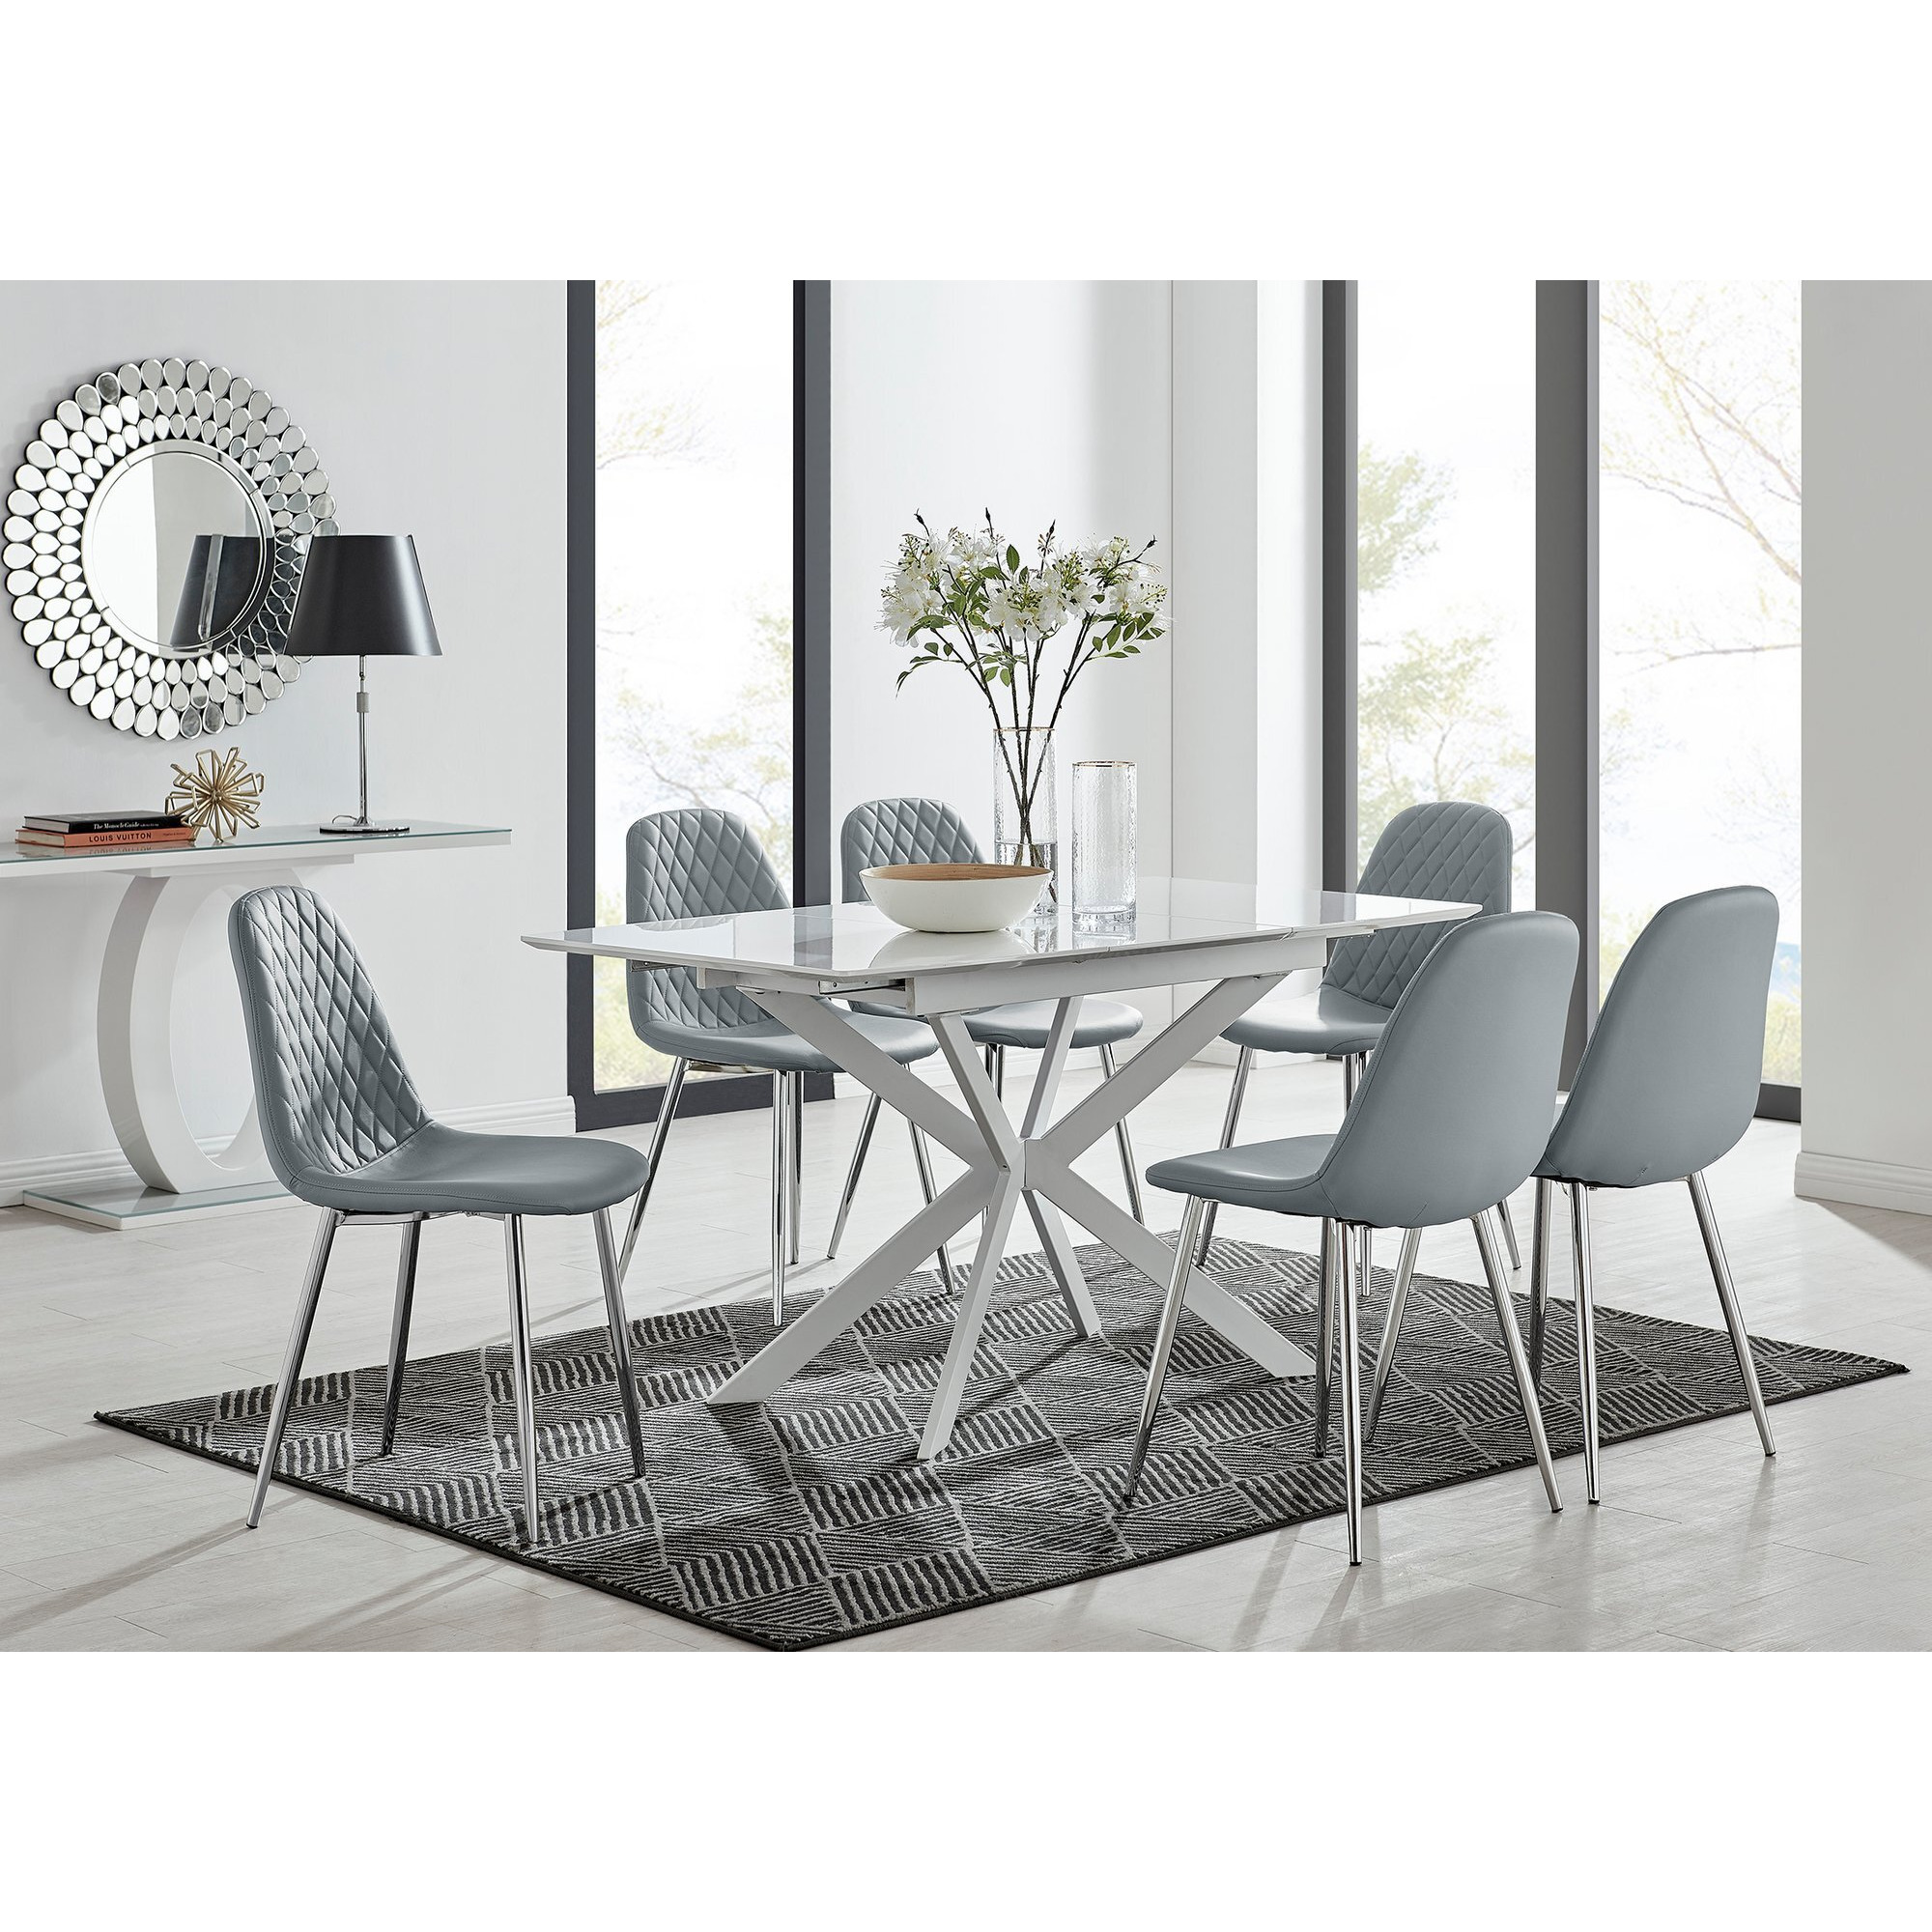 Lira 120 Extending Dining Table and 6 Corona Silver Leg Chairs